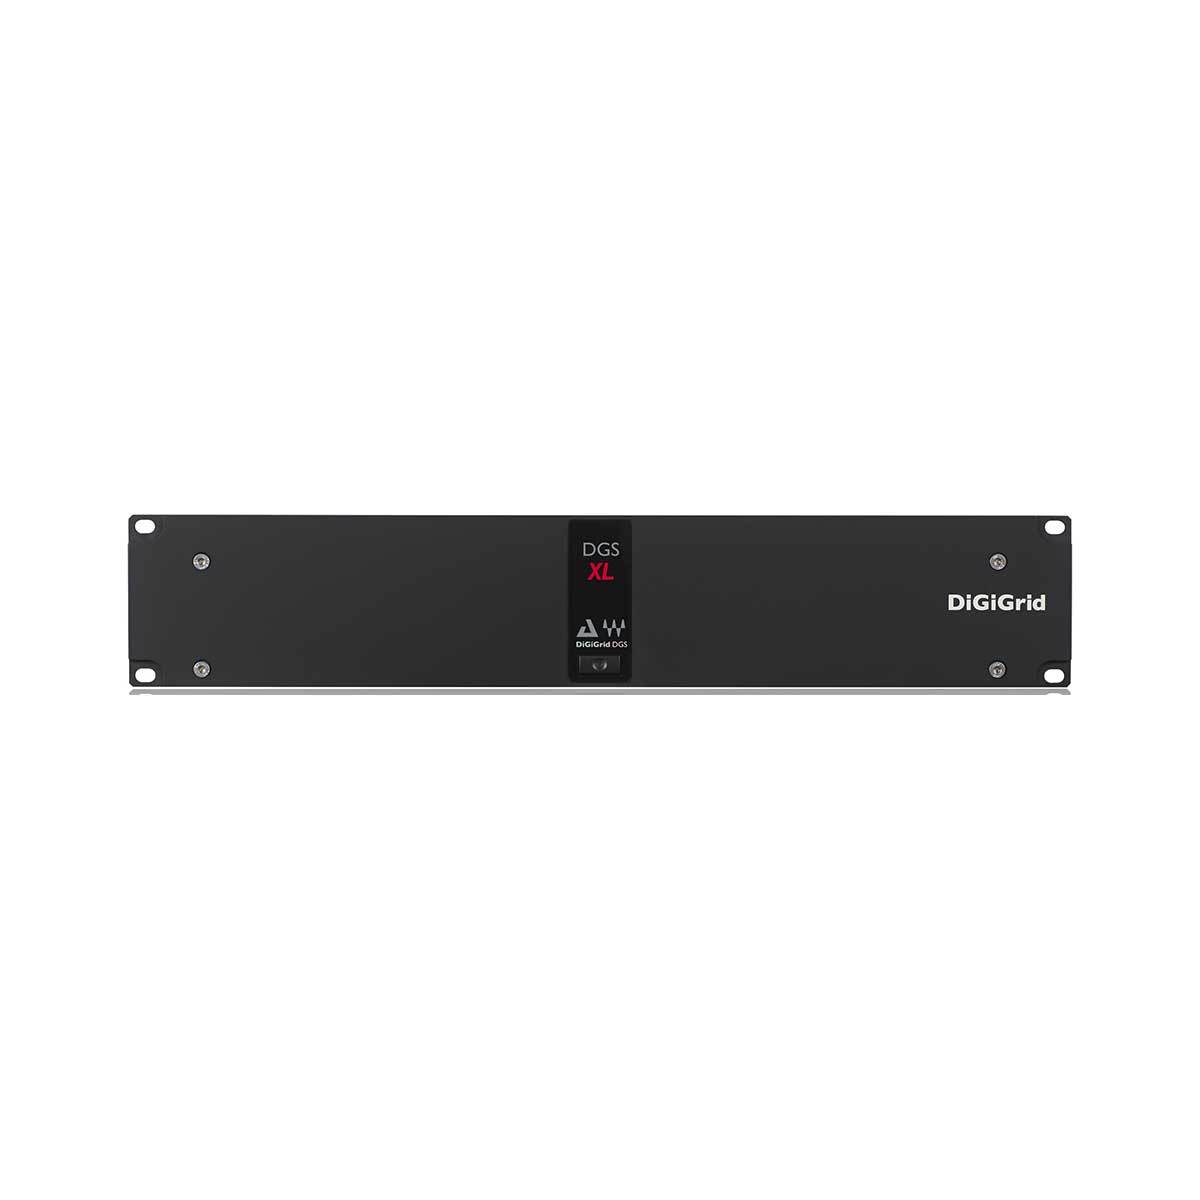 DSP Hardware - DiGiGrid DGS-XL Stand-alone I7v3 Extreme SoundGrid DSP Server With Integrated 4 Port PoE Switch